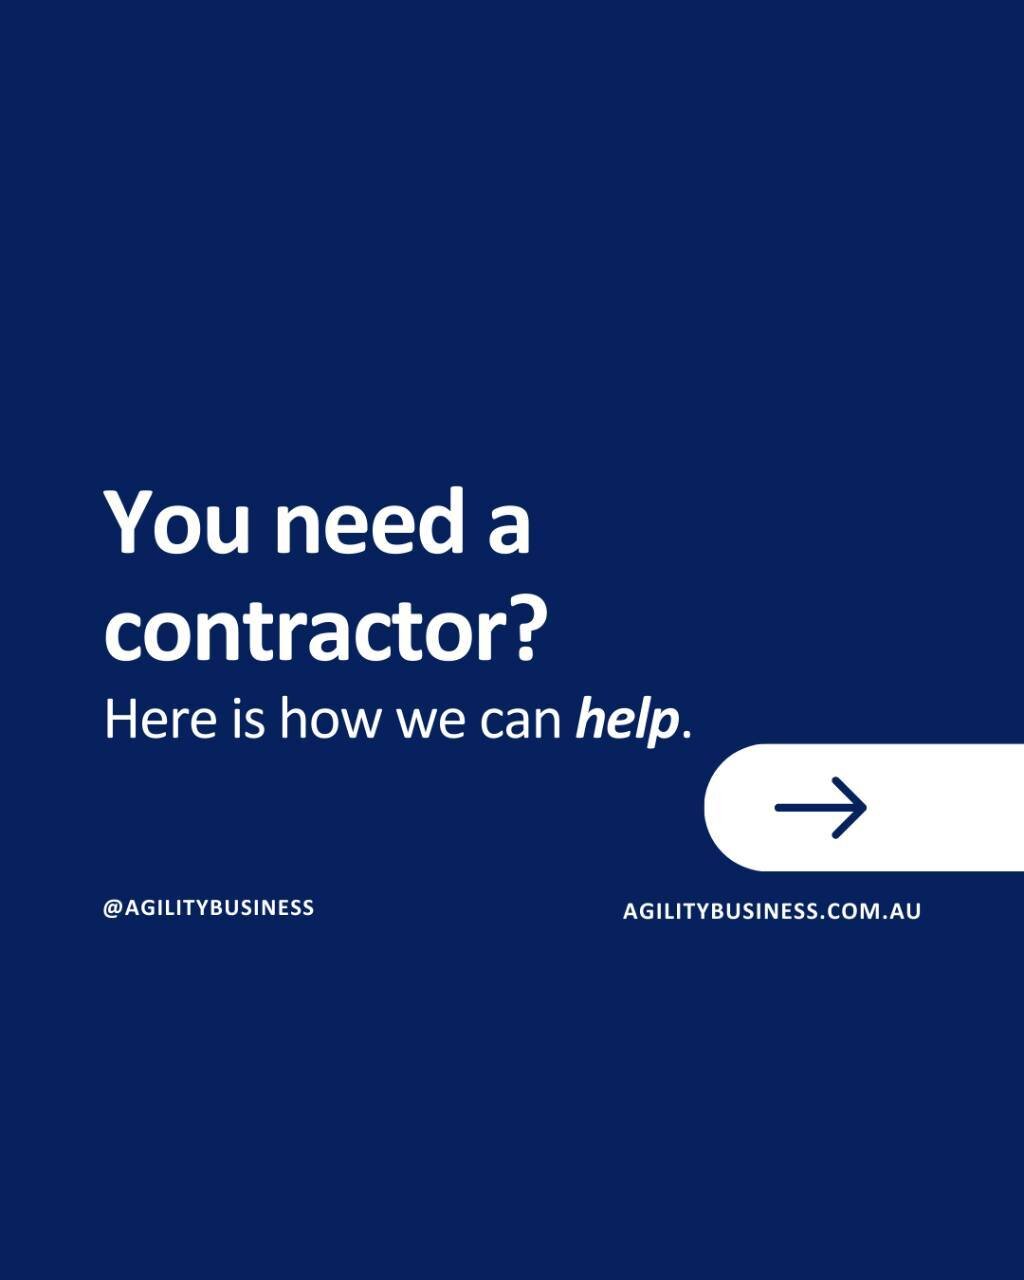 Would you rather play basketball 3 on 3, or stack the odds in your favour and play 4 on 3?

This is how contractors can contribute to your business.
The key is finding a great fit. Selecting, managing, and maximising the productivity of contractors r